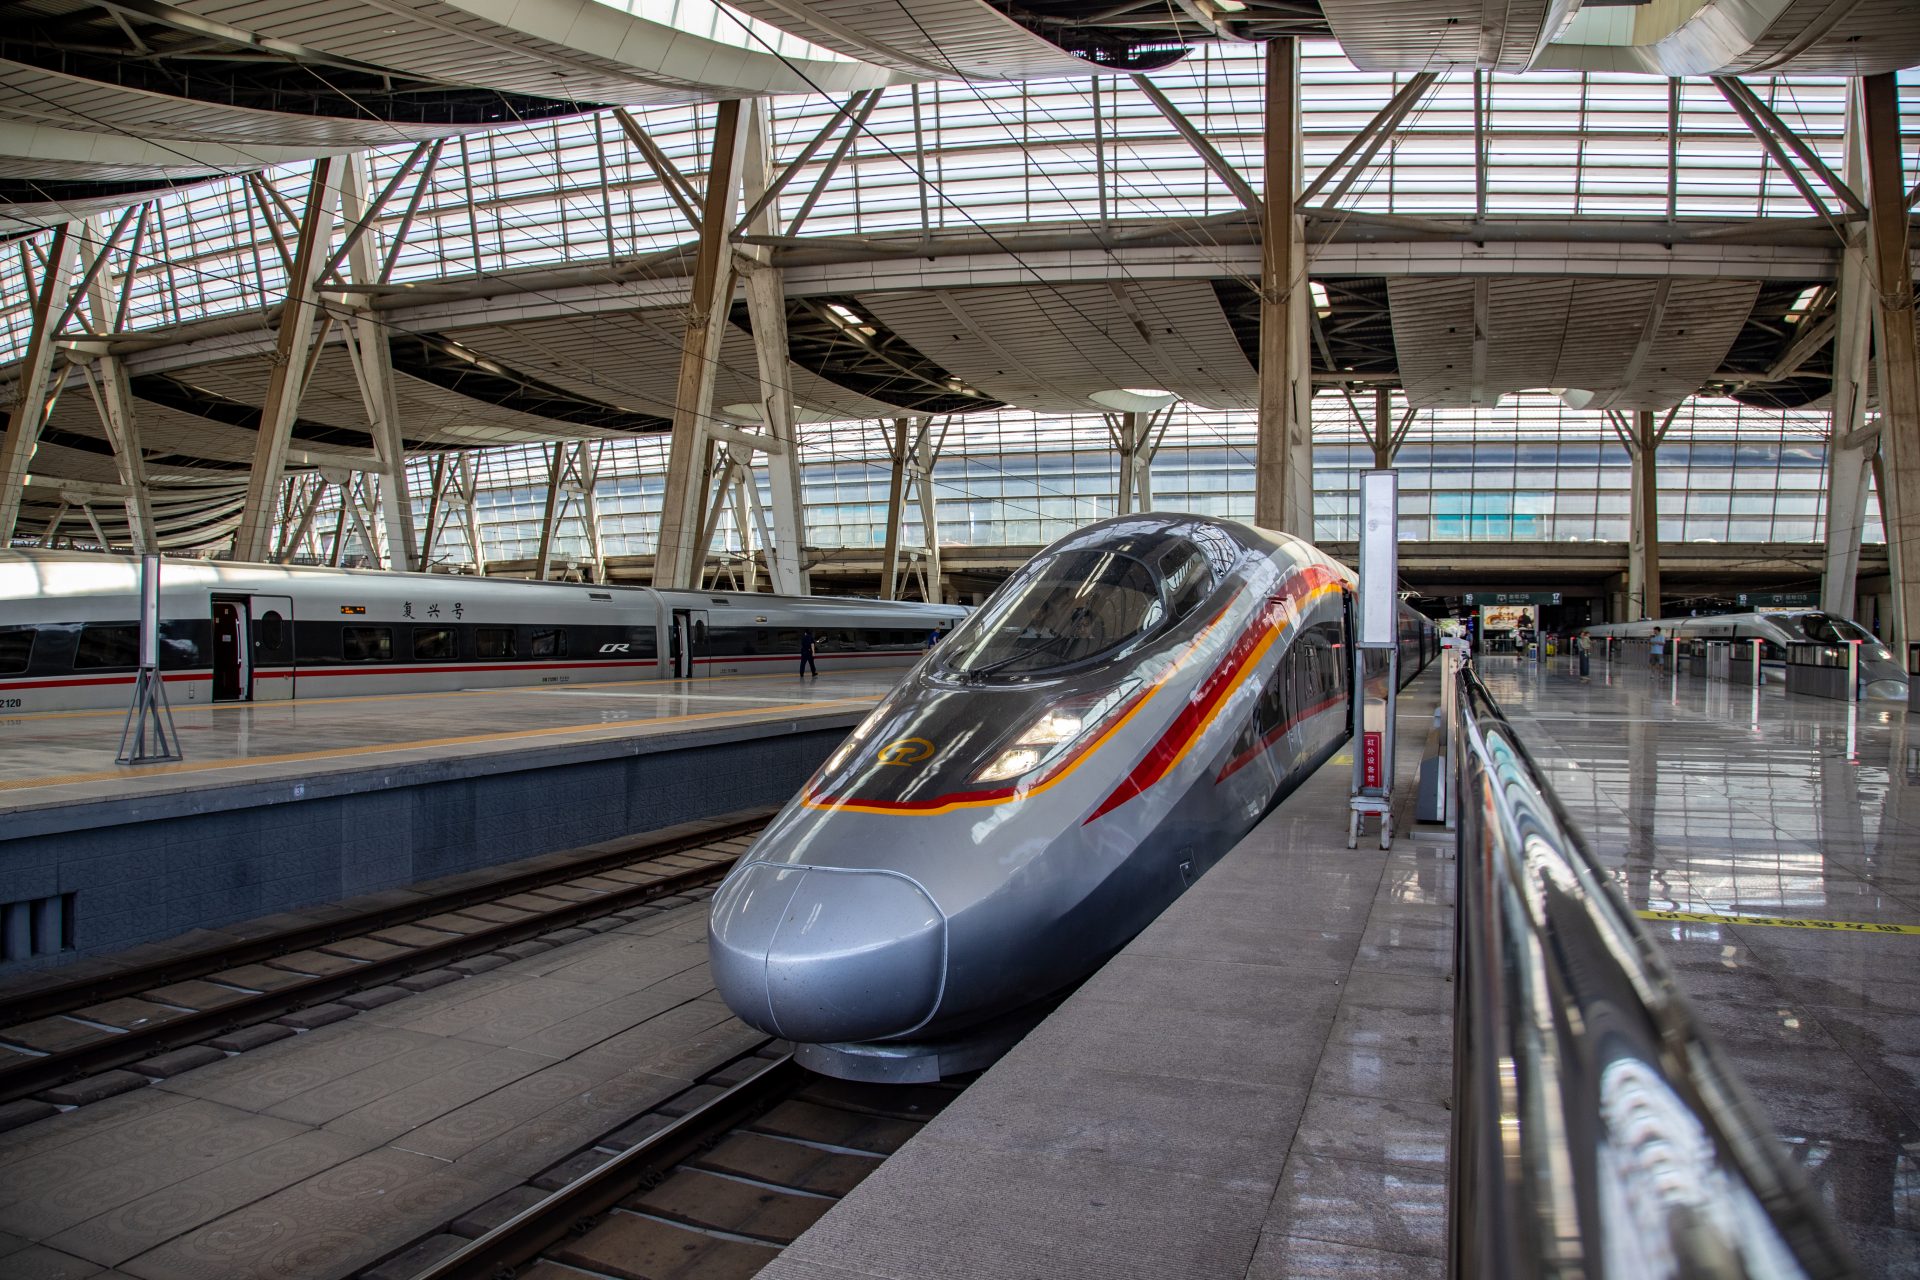 These are the fastest high-speed trains in the world